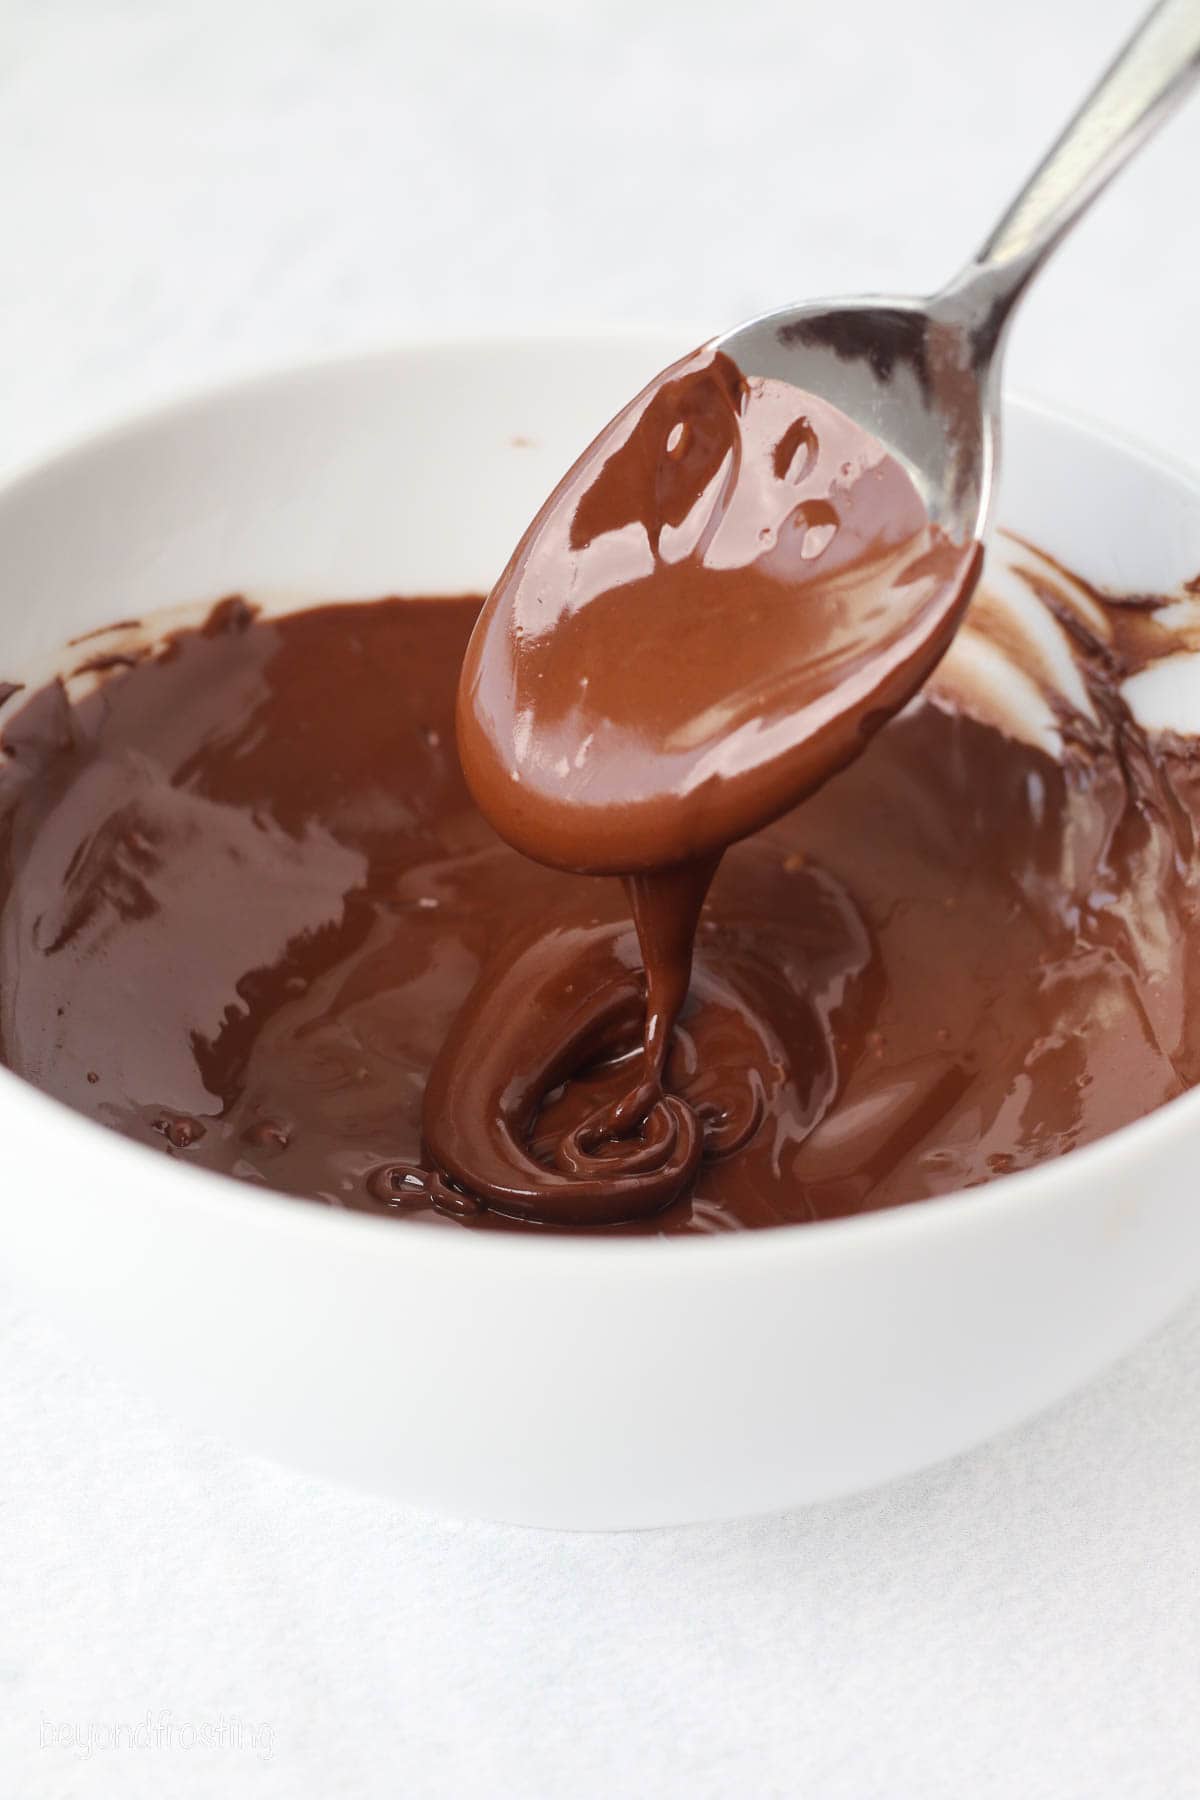 A spoon dipped into a bowl of melted chocolate.